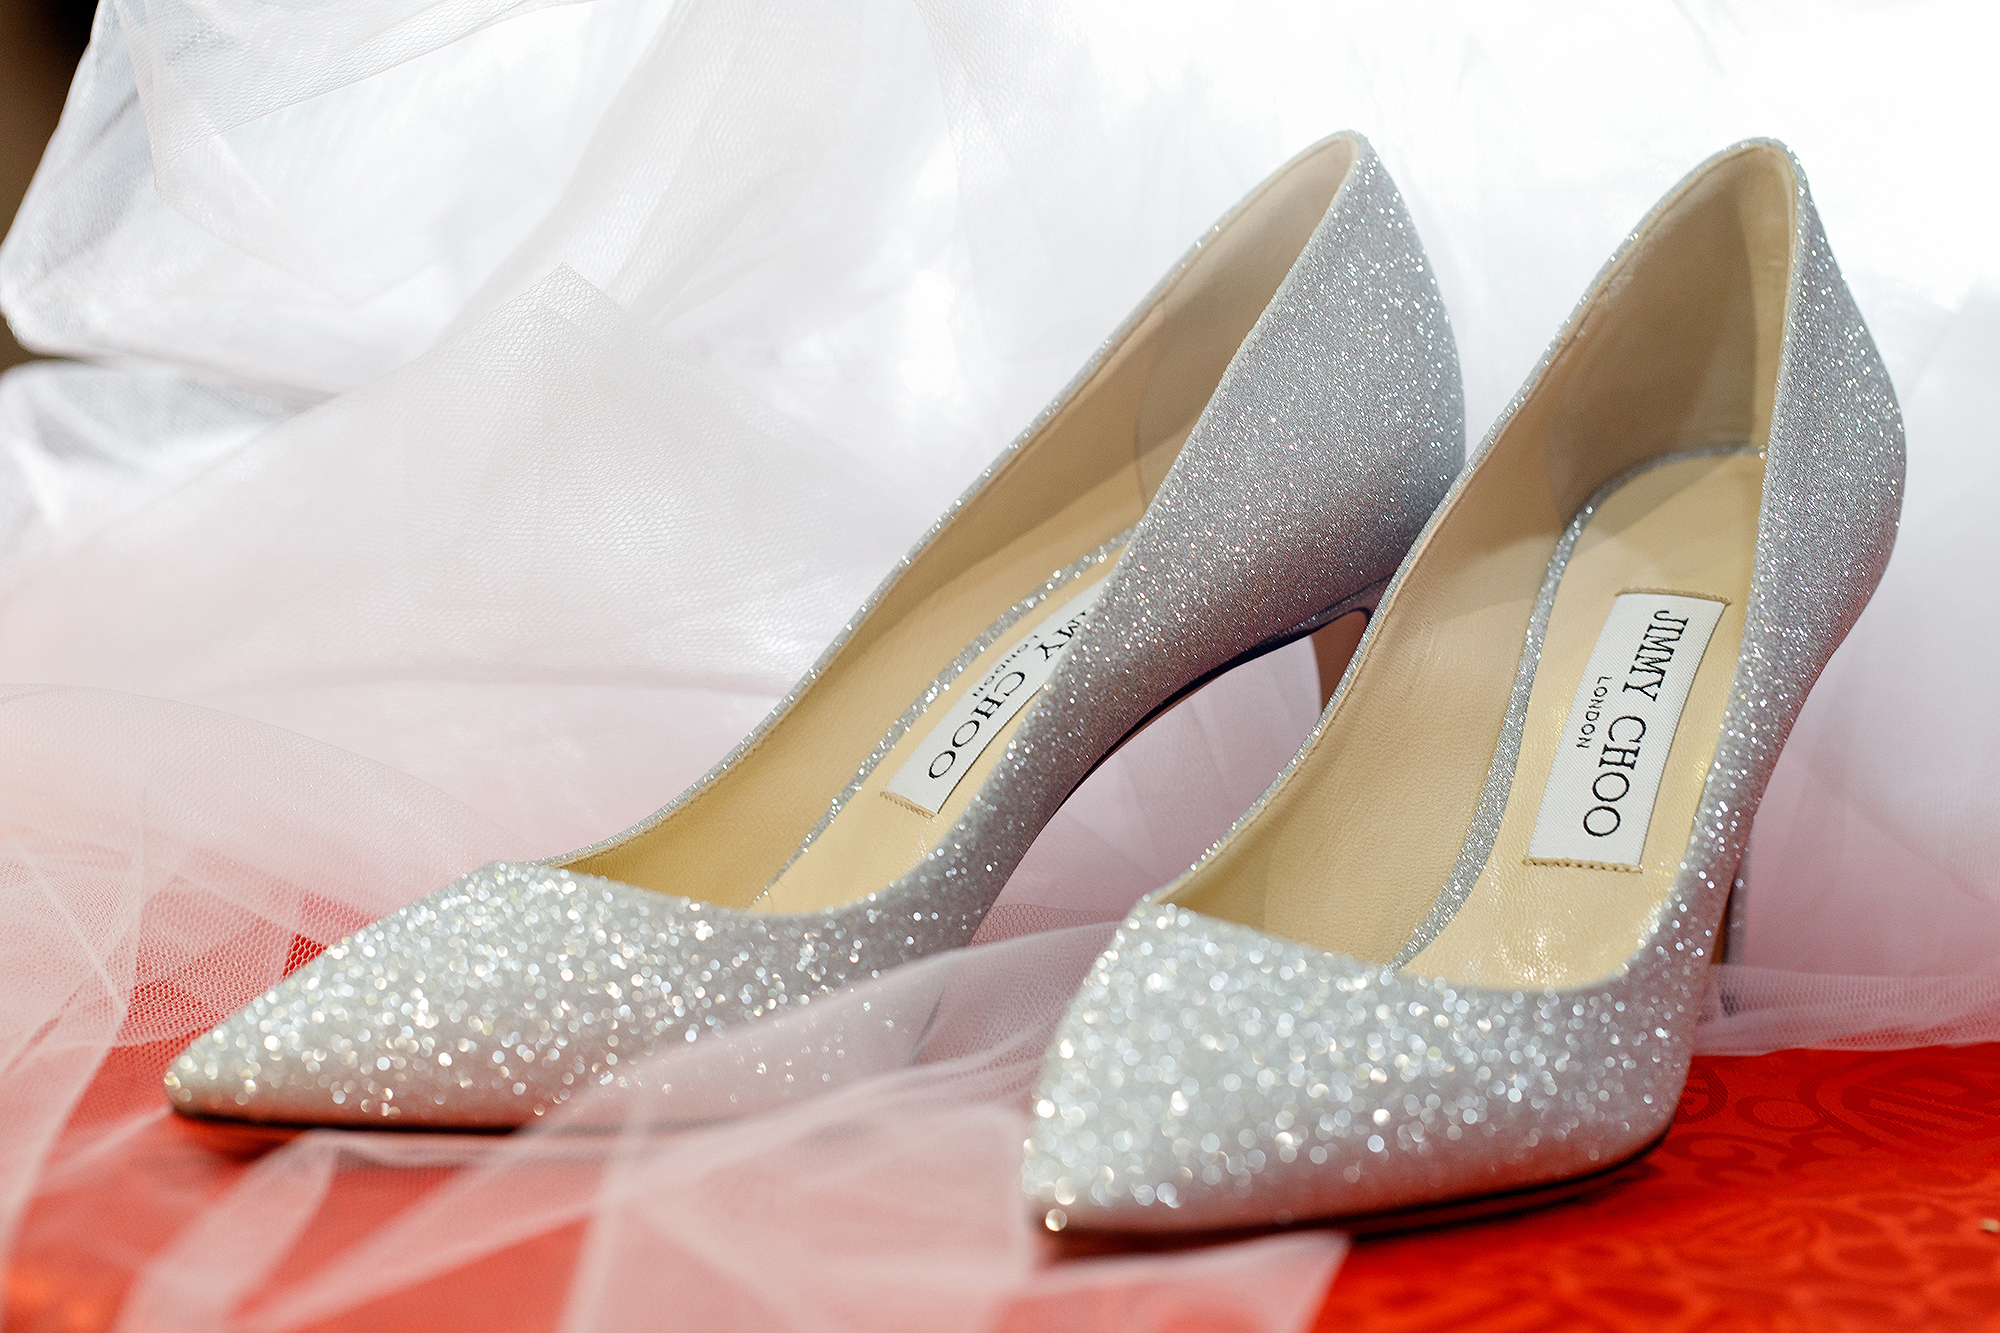 Welcome to the Family, Jimmy Choo!